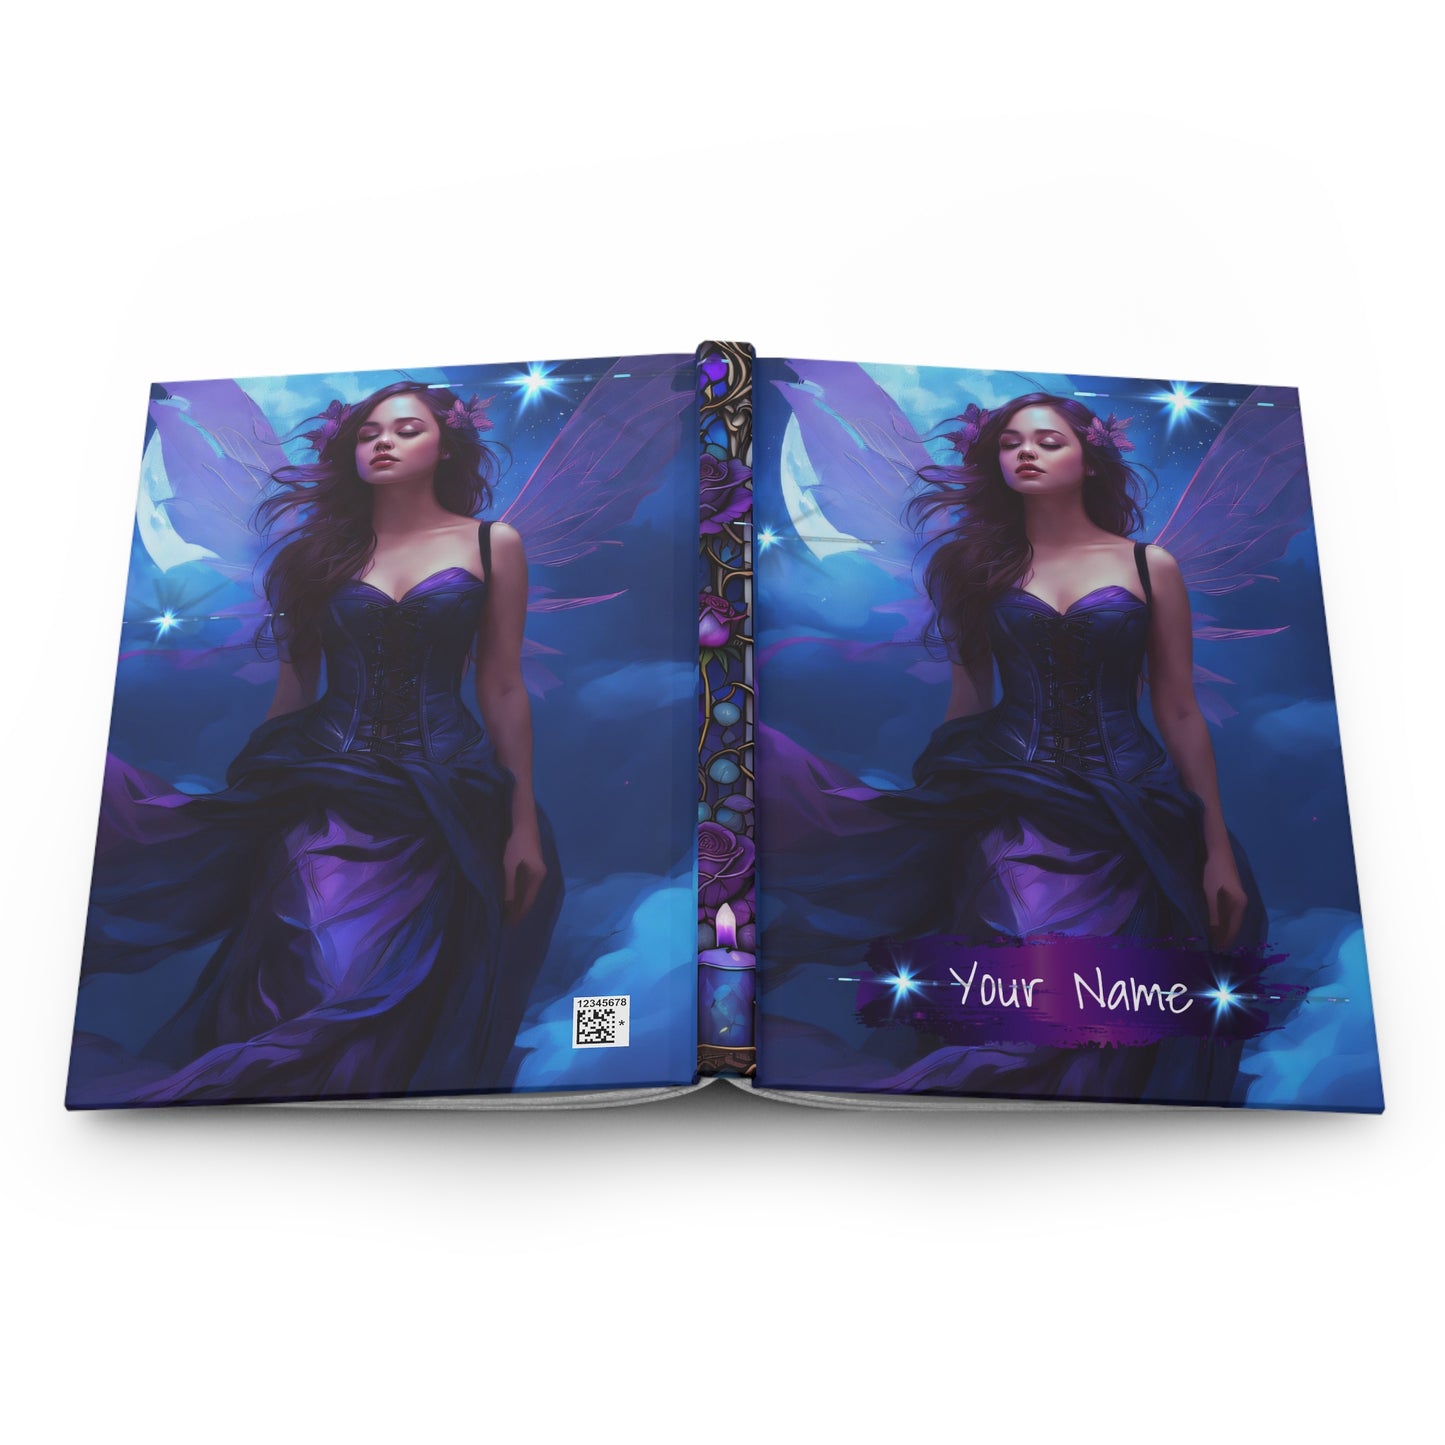 Fairy Down Syndrome Hardcover Journal  | Fairy Notebook | Fairy Notebook | Butterfly Journal | Faerie Journal | Fairy Gifts  |